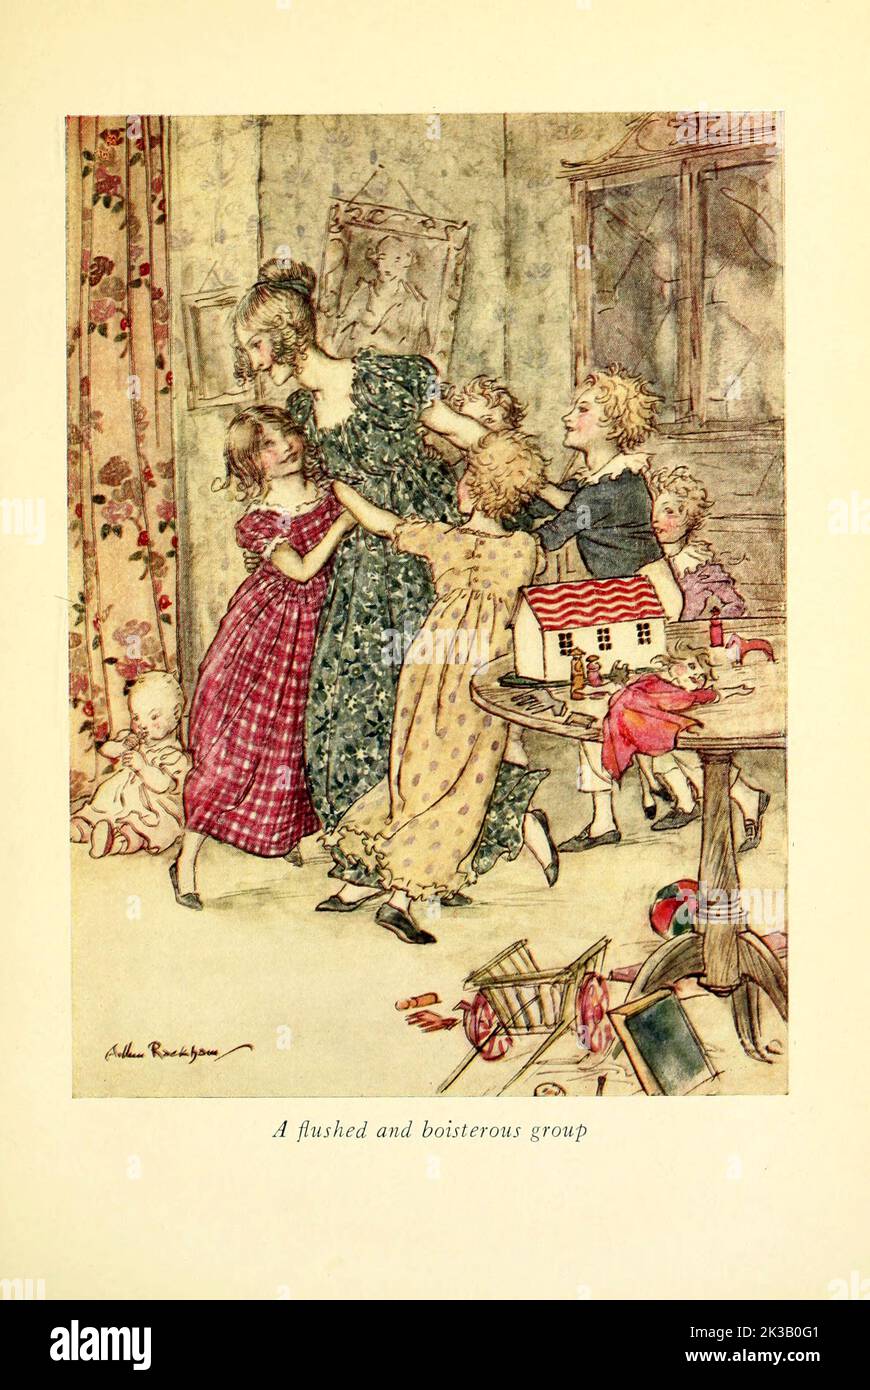 A flushed and boisterous group Illustrated by Arthur Rackham from the book ' A Christmas carol ' by Charles Dickens, Publication date 1915 Publisher London : William Heinemann ; Philadelphia : J.B. Lippincott Co. Stock Photo